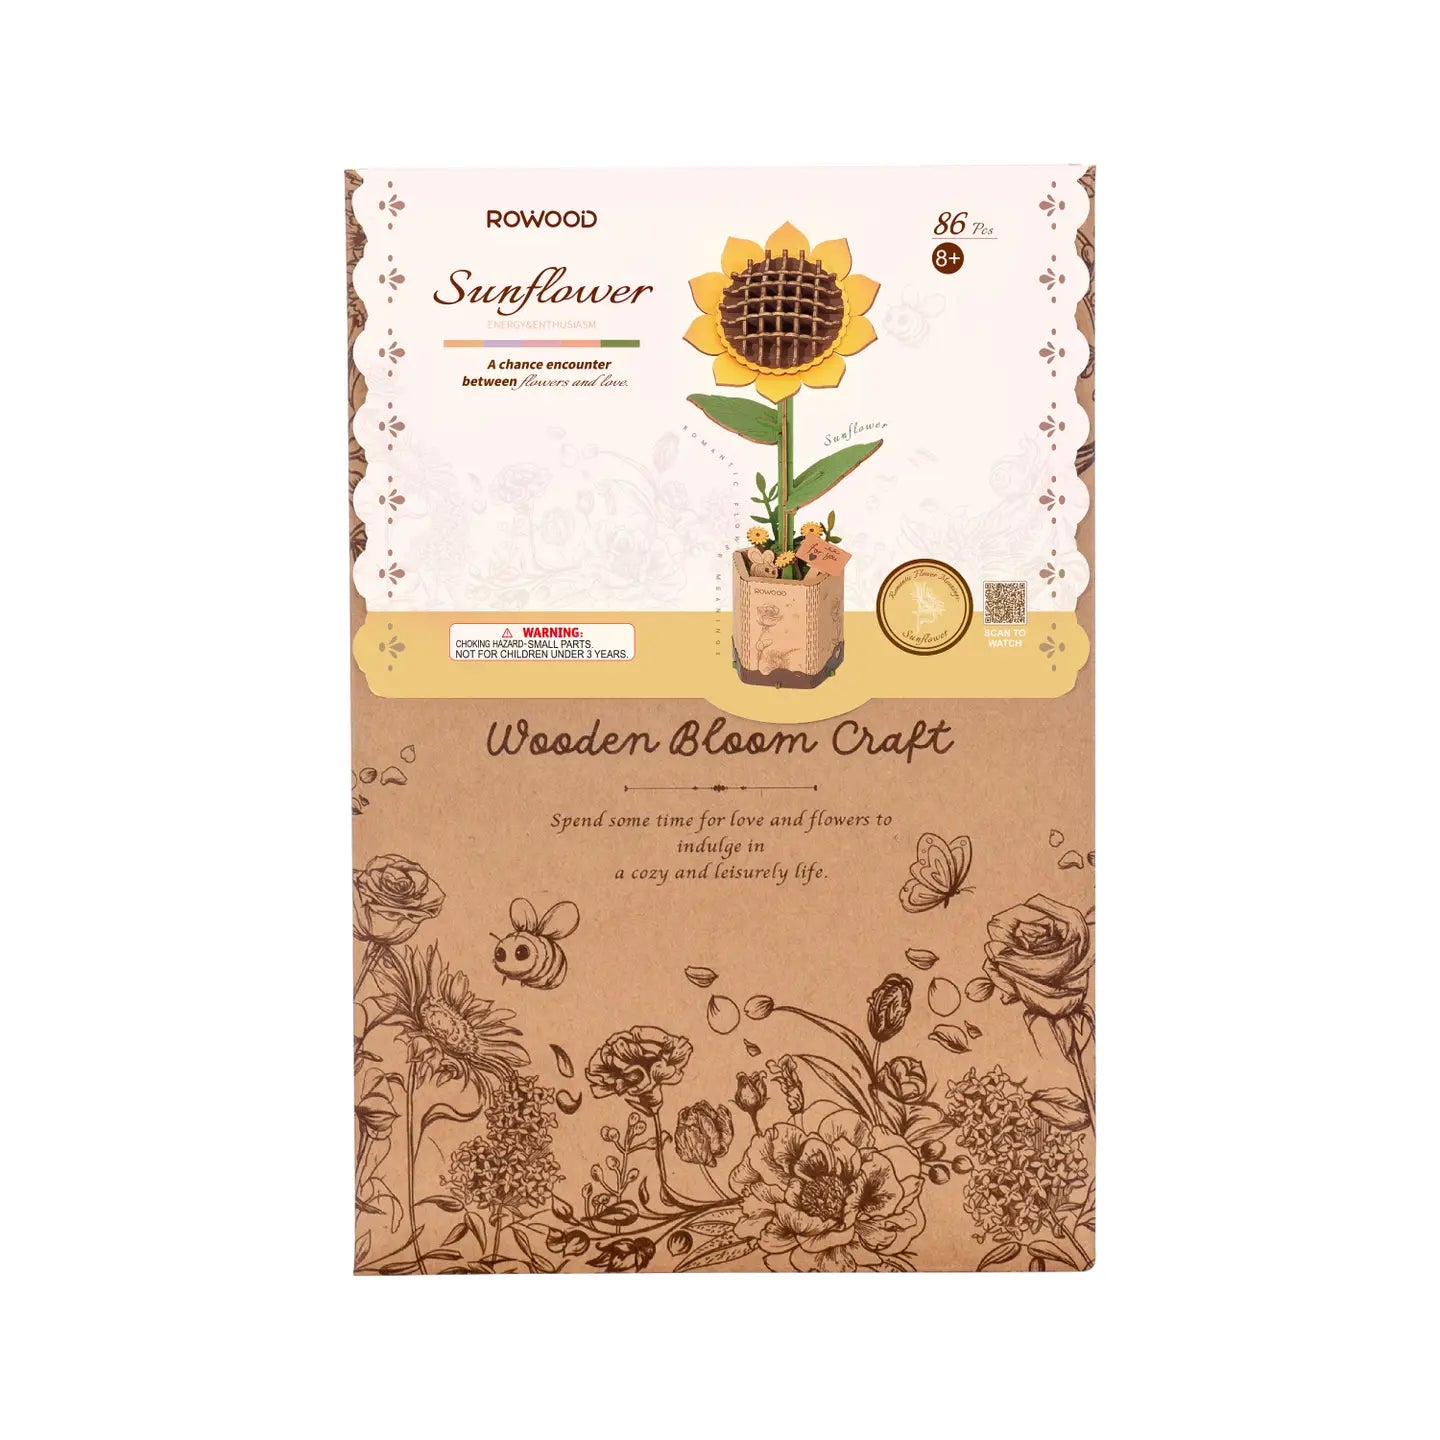 A DIY wooden flower 3D puzzle kit featuring sunflower seeds packaging, flower-themed paper, and sunflower visuals. Ideal for creative gifts and home decor. From Strangecat Toys.